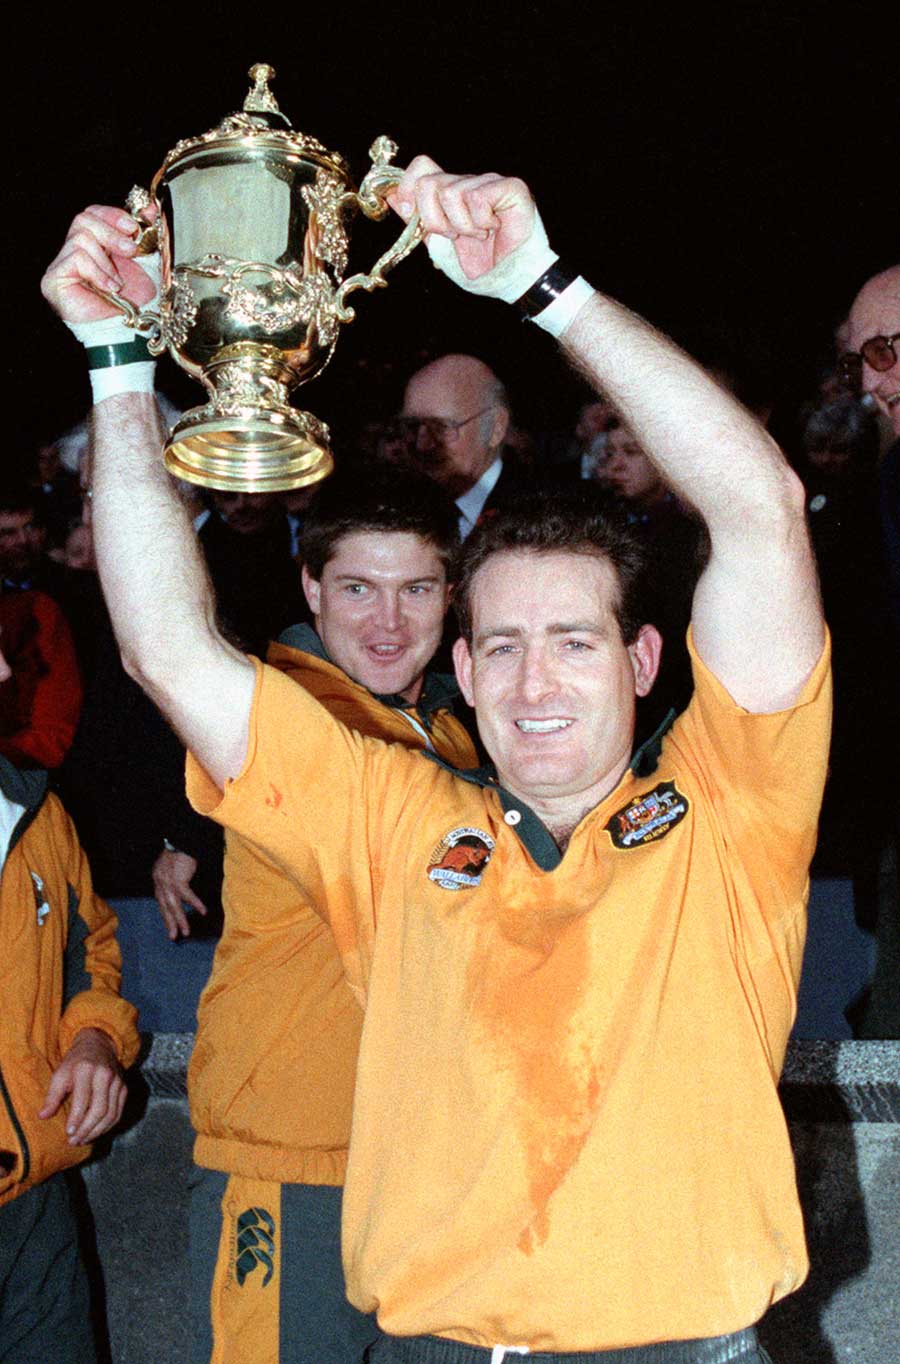 David Campese holds aloft the Rugby World Cup